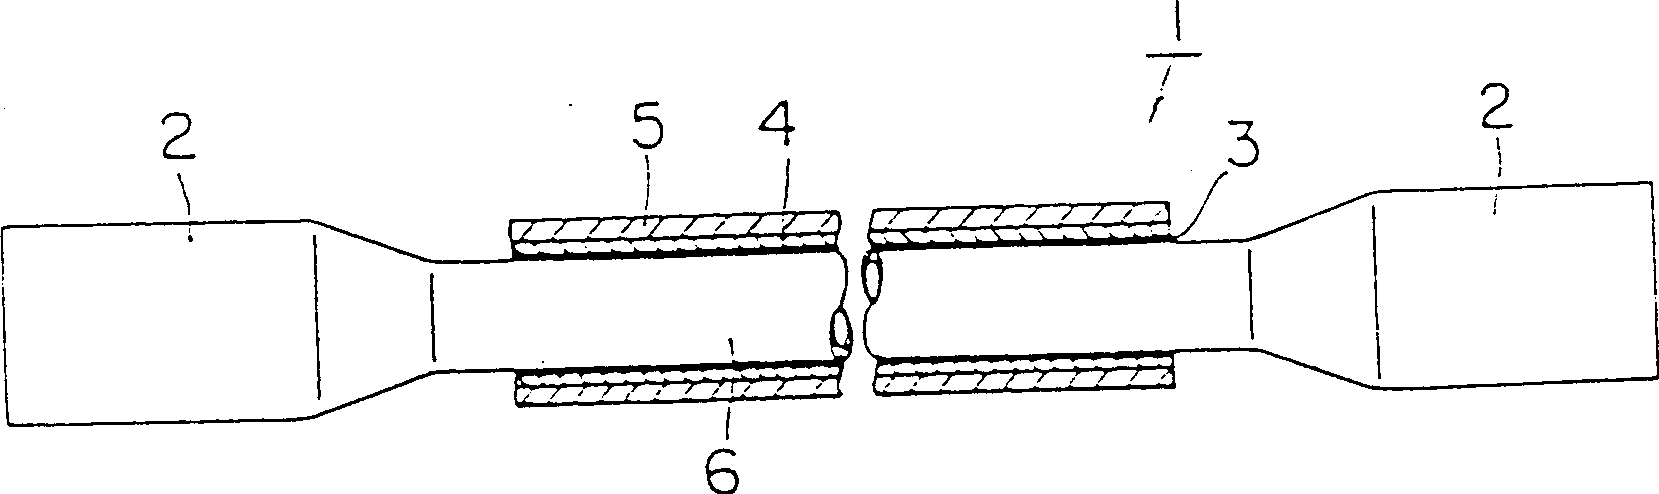 Steel pipe connector of ladder-type sleeper for railway track